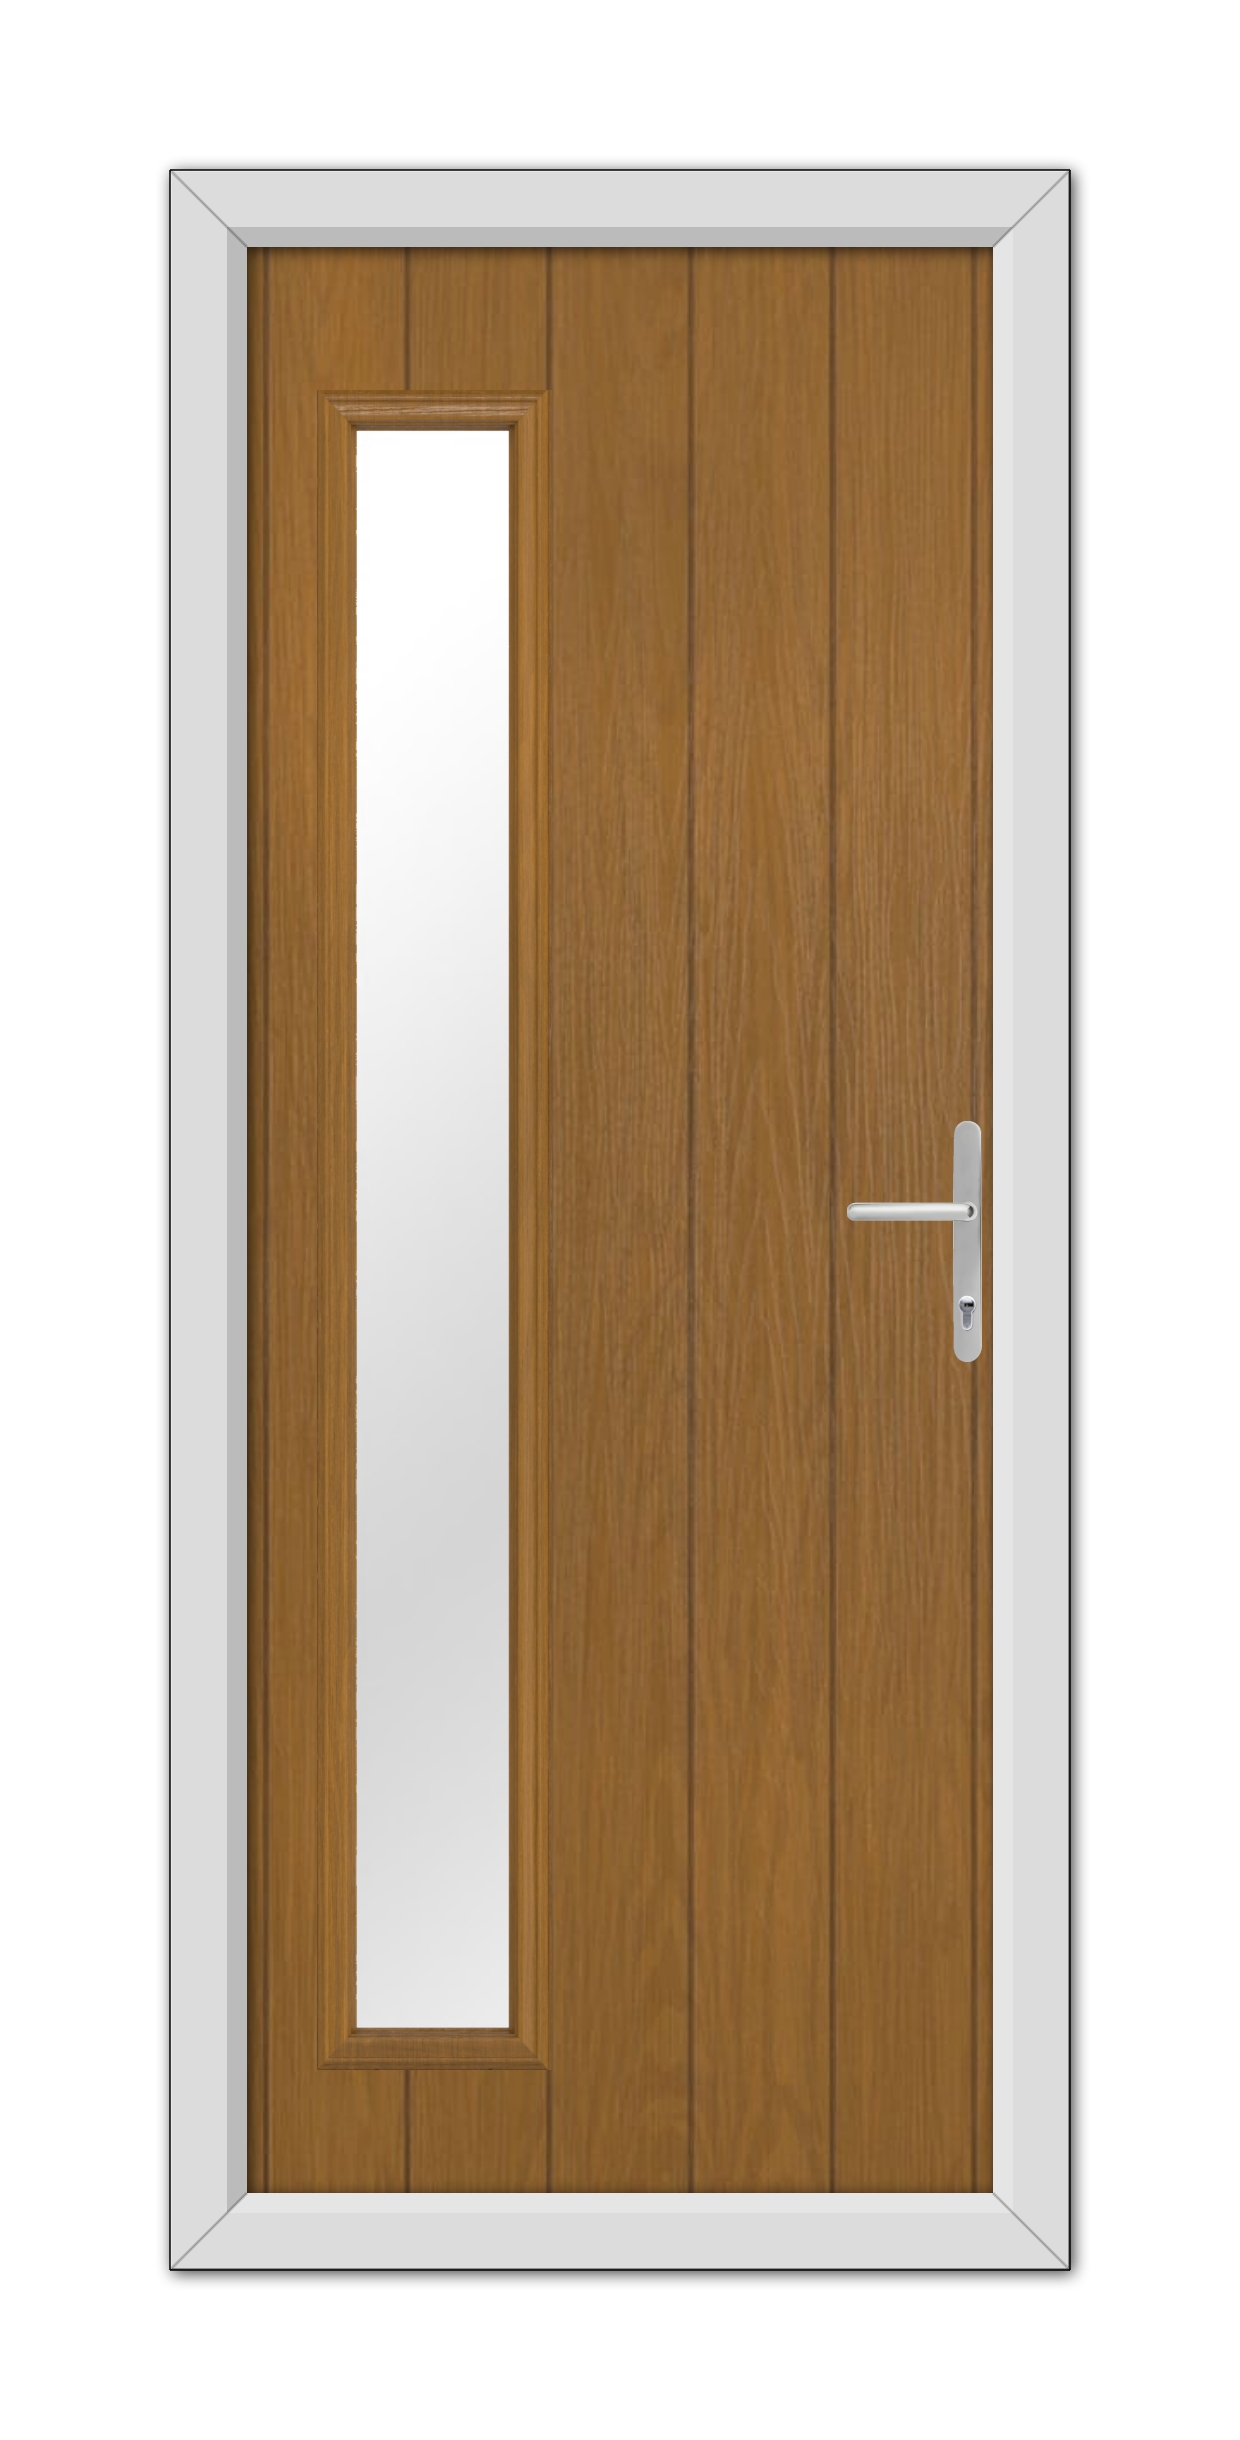 A modern Oak Sutherland Composite Door 48mm Timber Core with a vertical glass panel on the left and a metallic handle on the right, set within a white frame.